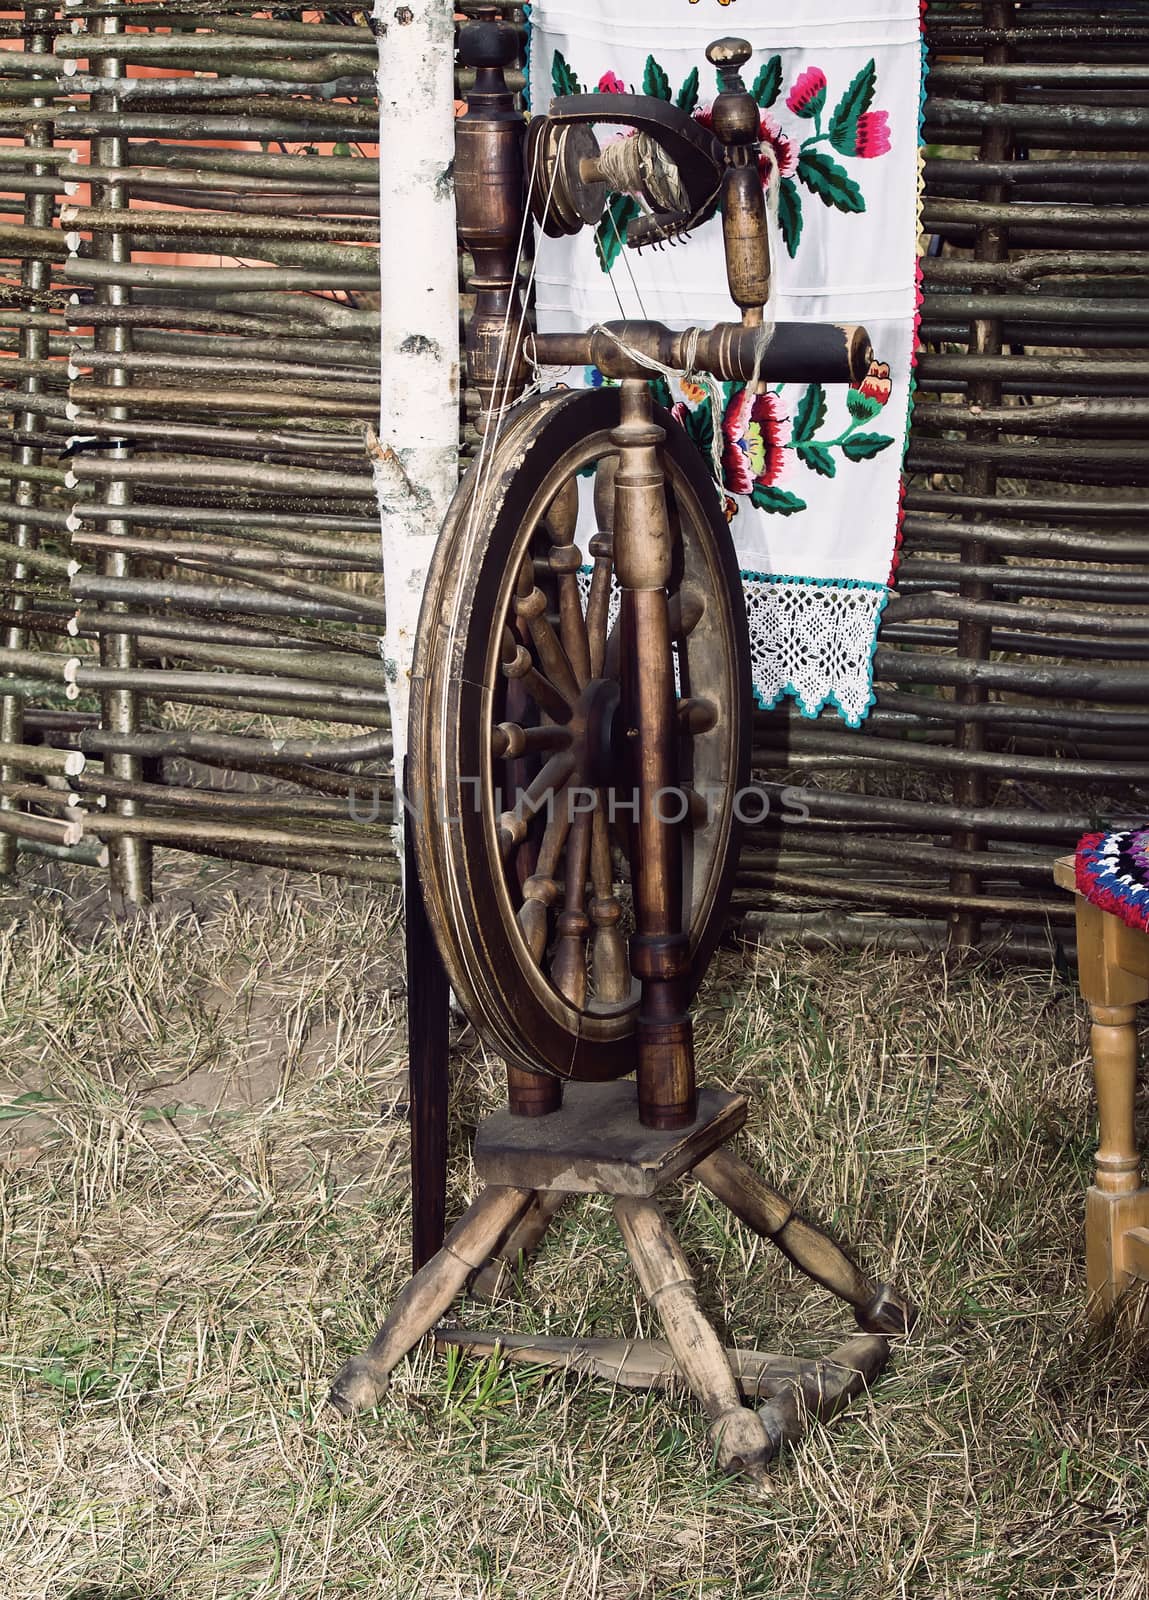 Antique wooden spinning wheel on a background of woven fence. On the fence hangs a beautiful embroidered pattern towel.